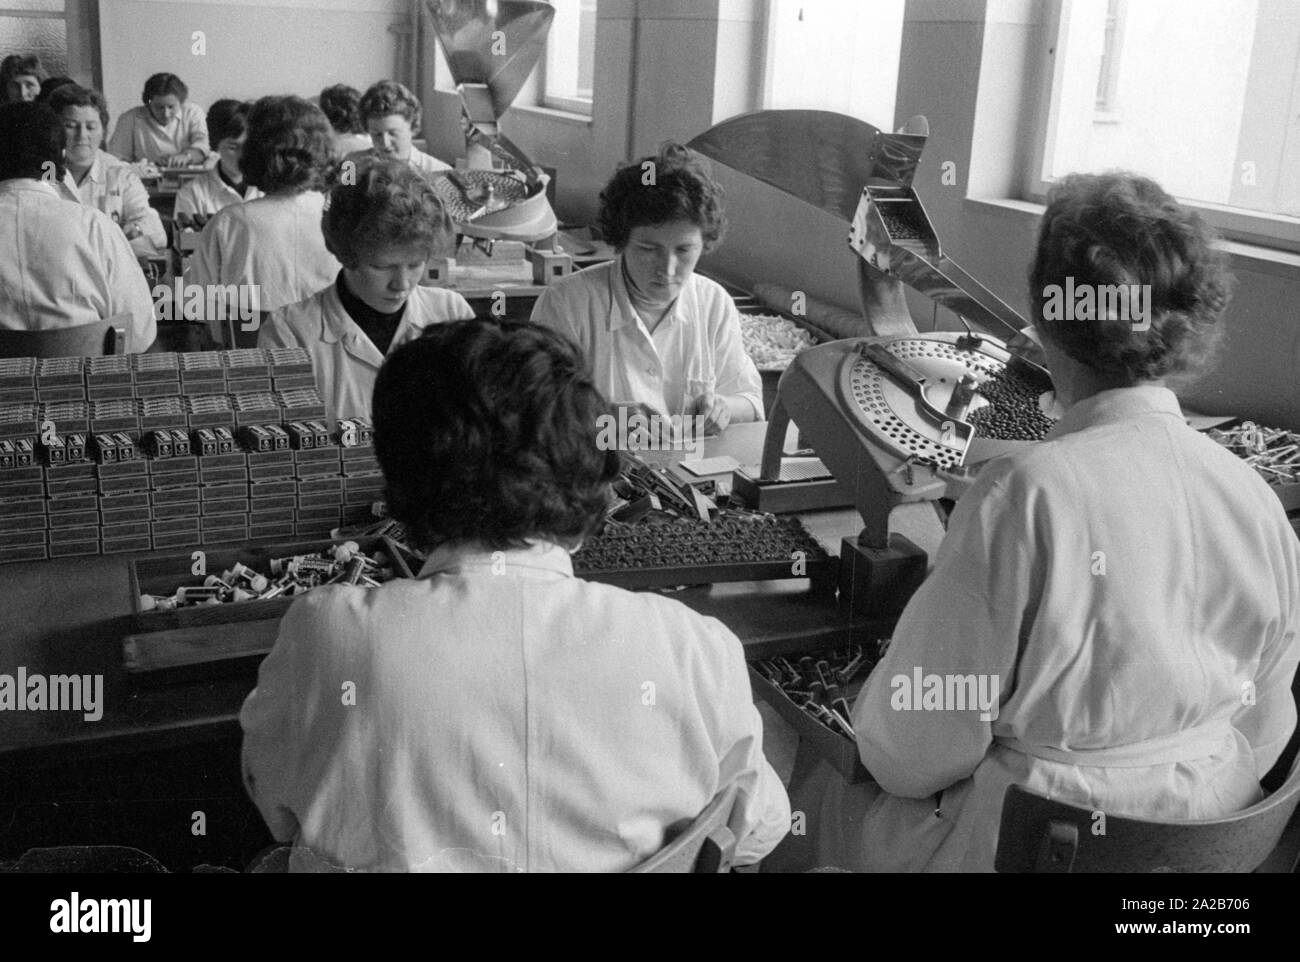 Packaging of vaccines in the chemical factory Ravensberg, the producer of the new vaccine. Around 1960 committees recommended the vaccination against influenza viruses for the first time in the Federal Republic of Germany. Stock Photo